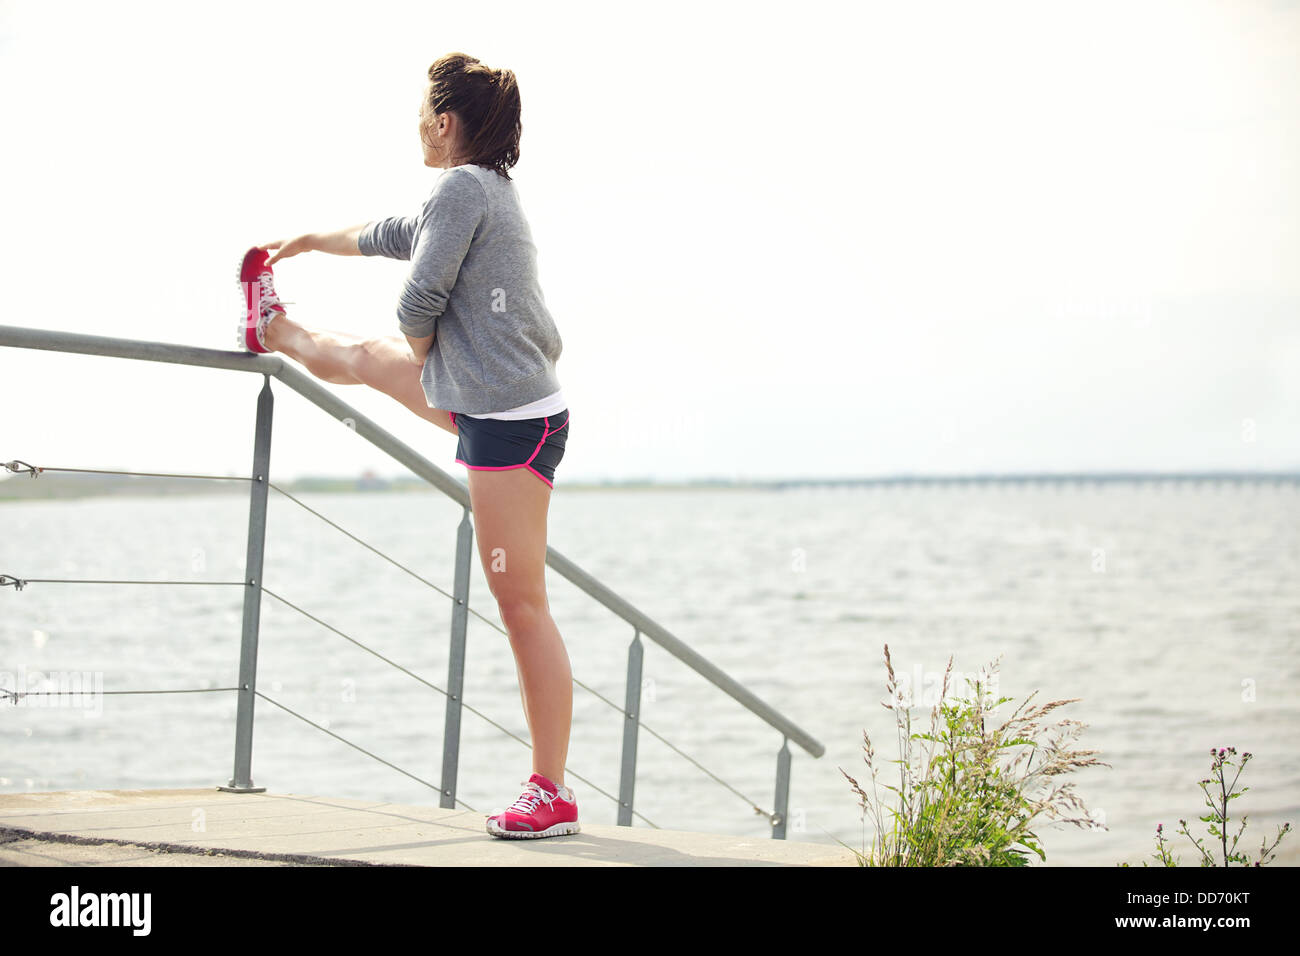 Active young female runner stretching her legs outdoor before running workout. Active lifestyle. Stock Photo